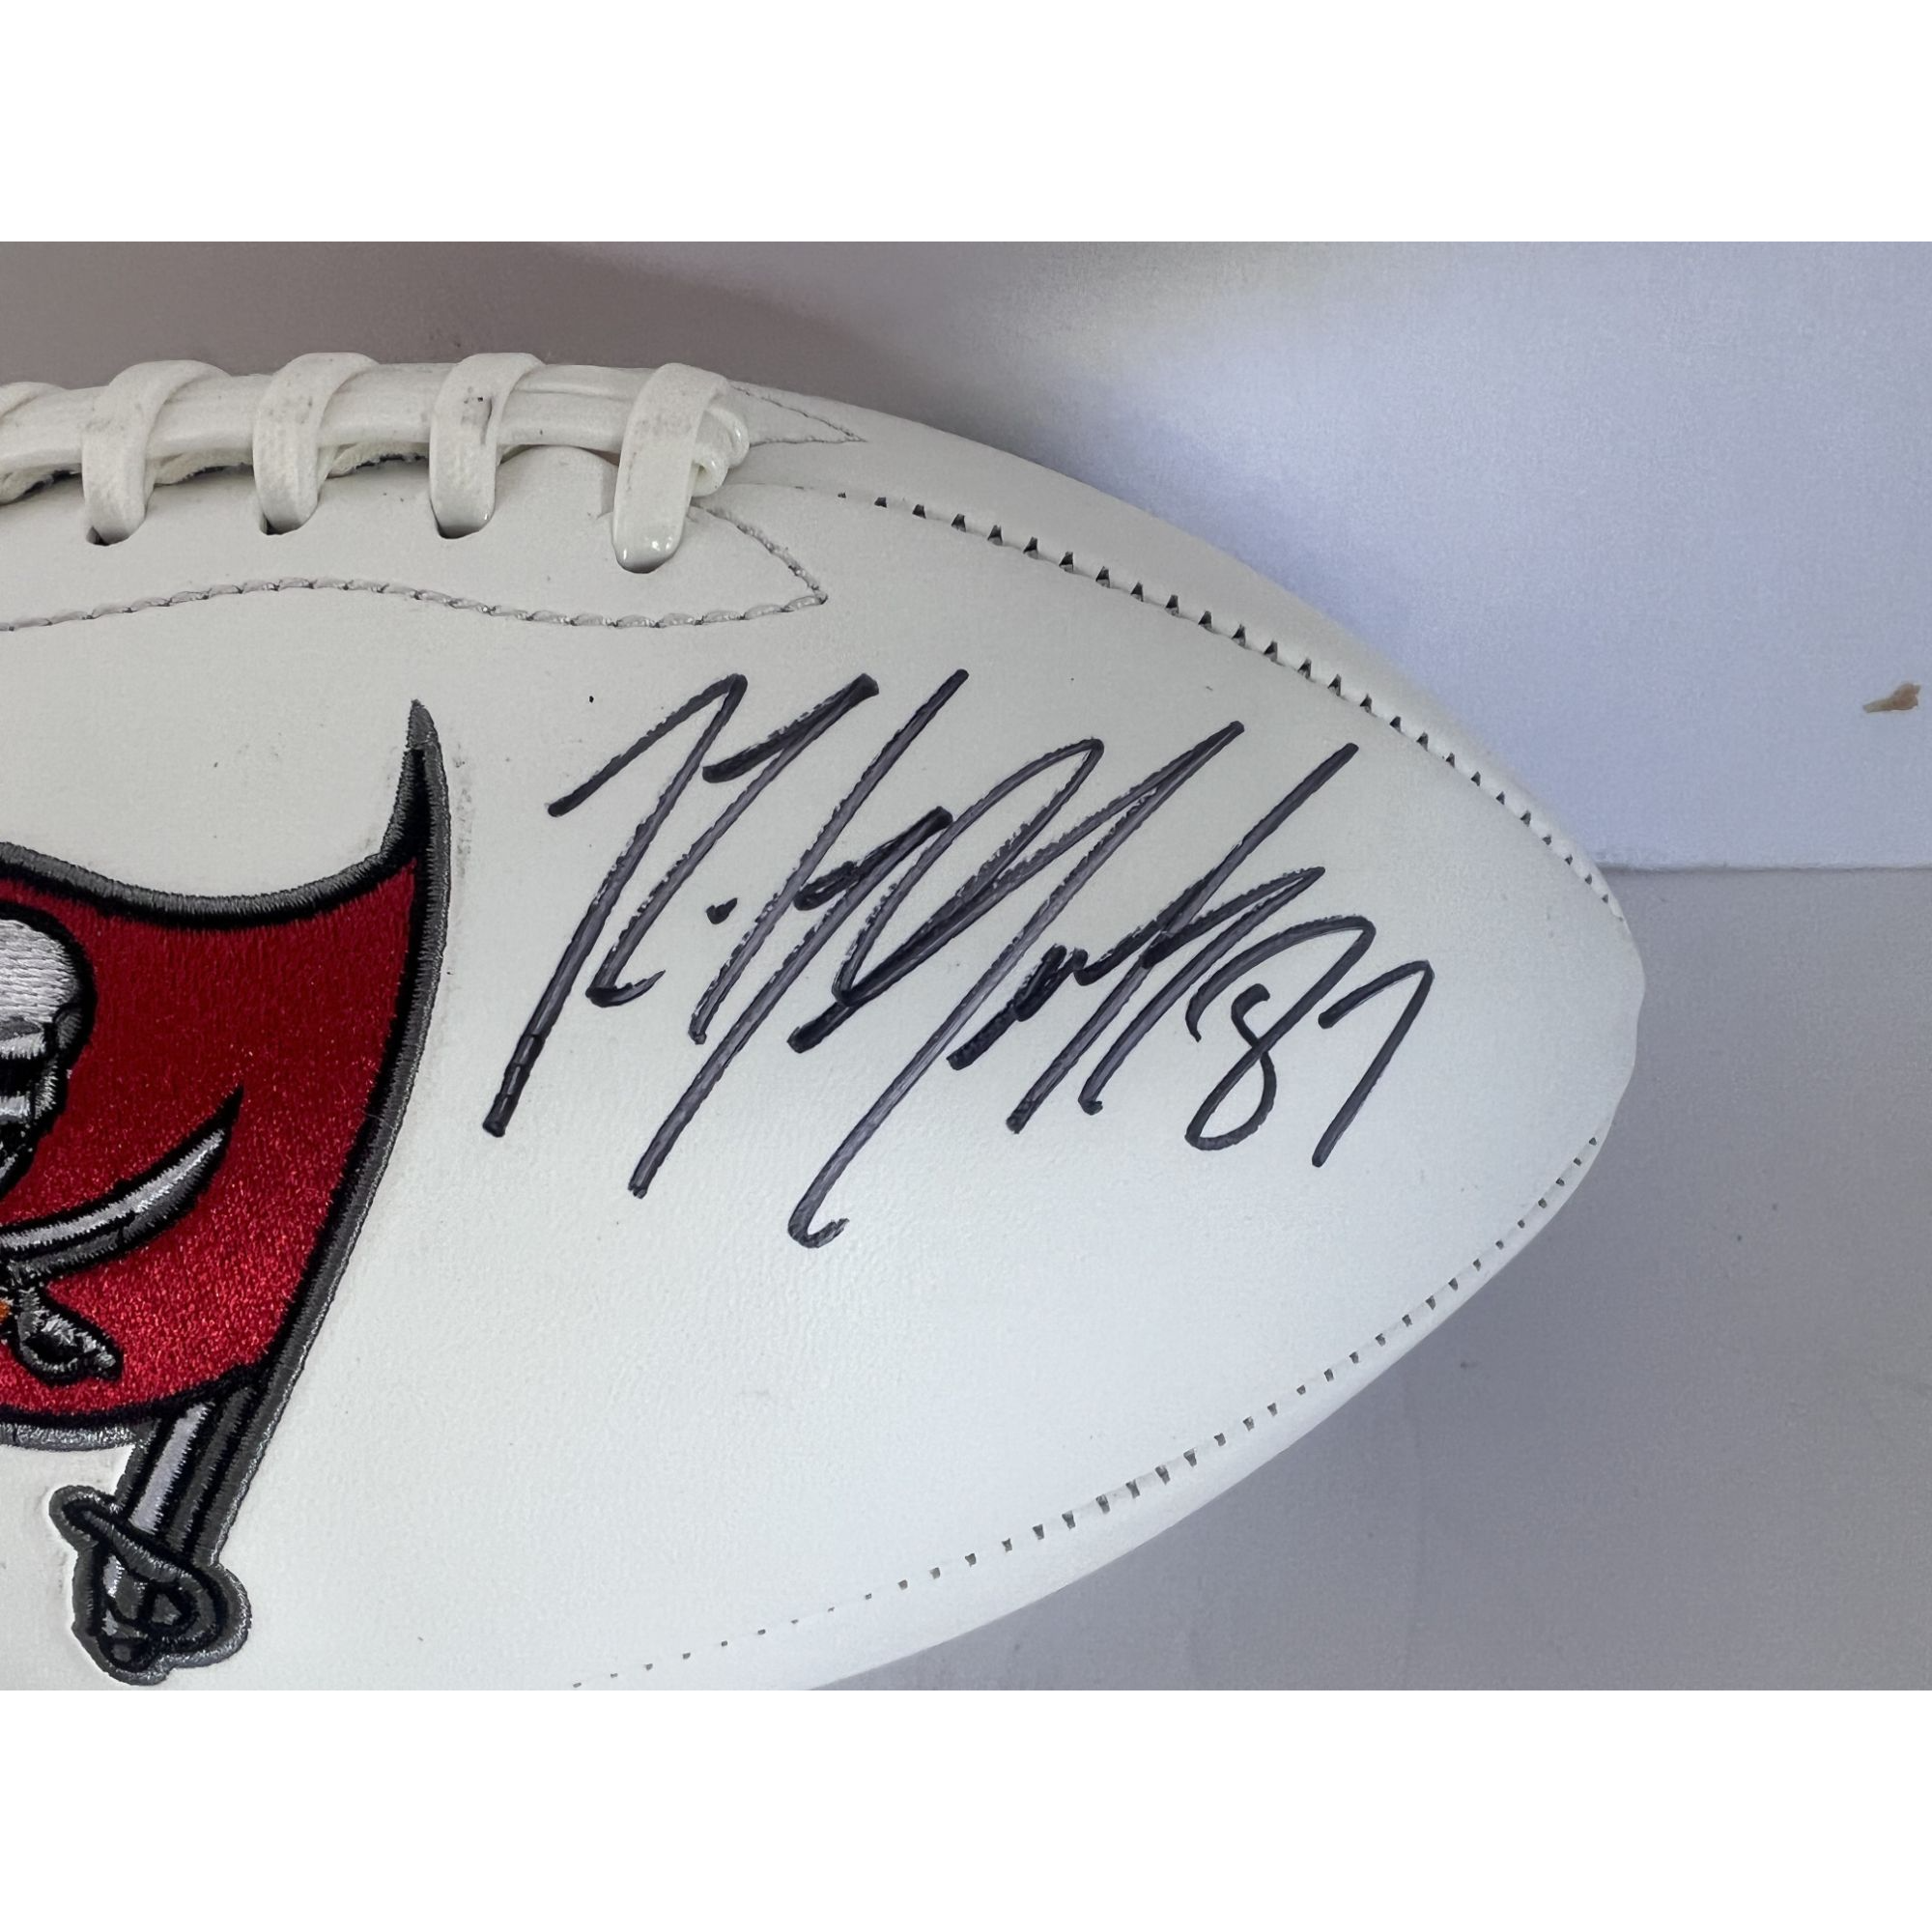 Tampa Bay Buccaneers full size football Tom Brady Rob Gronkowski Mike Evans Bruce Arians signed with proof